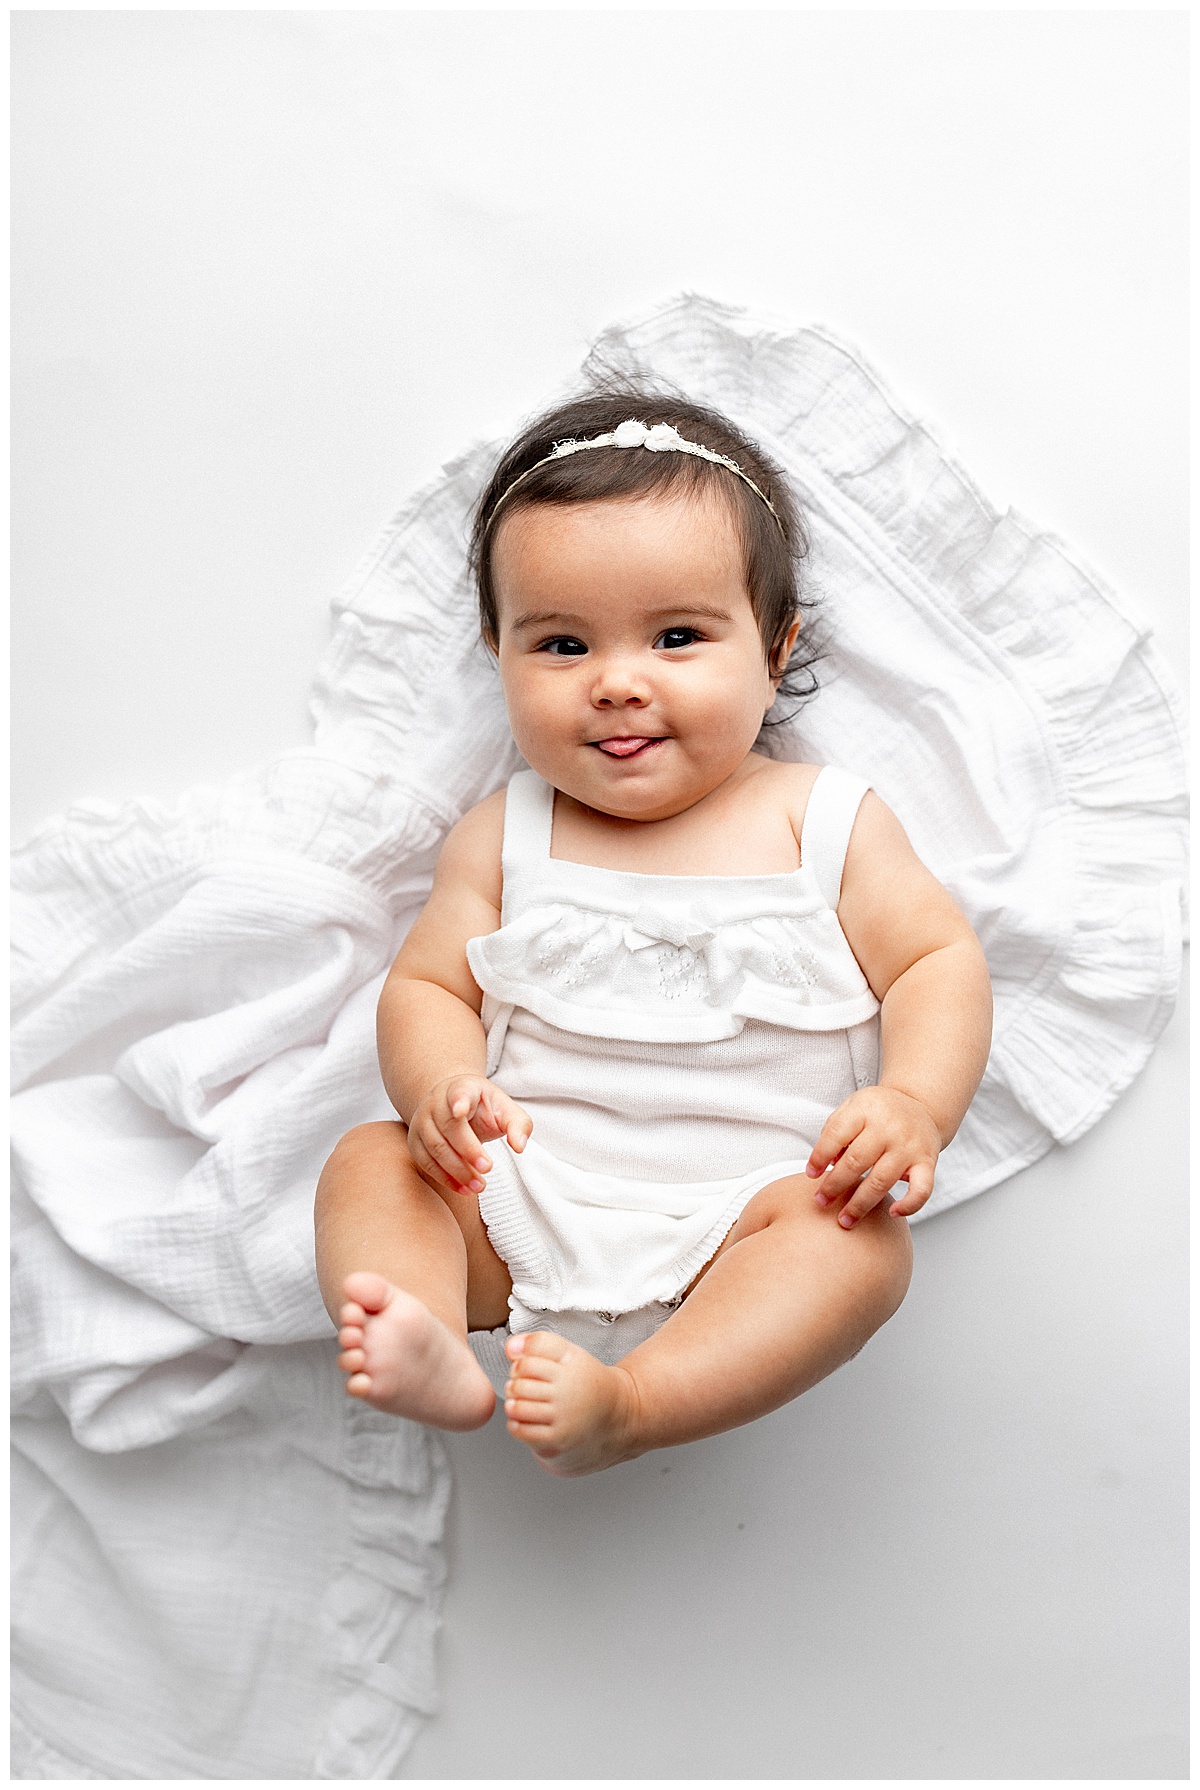 Baby lays on the ground in white outfit during baby photography sesson